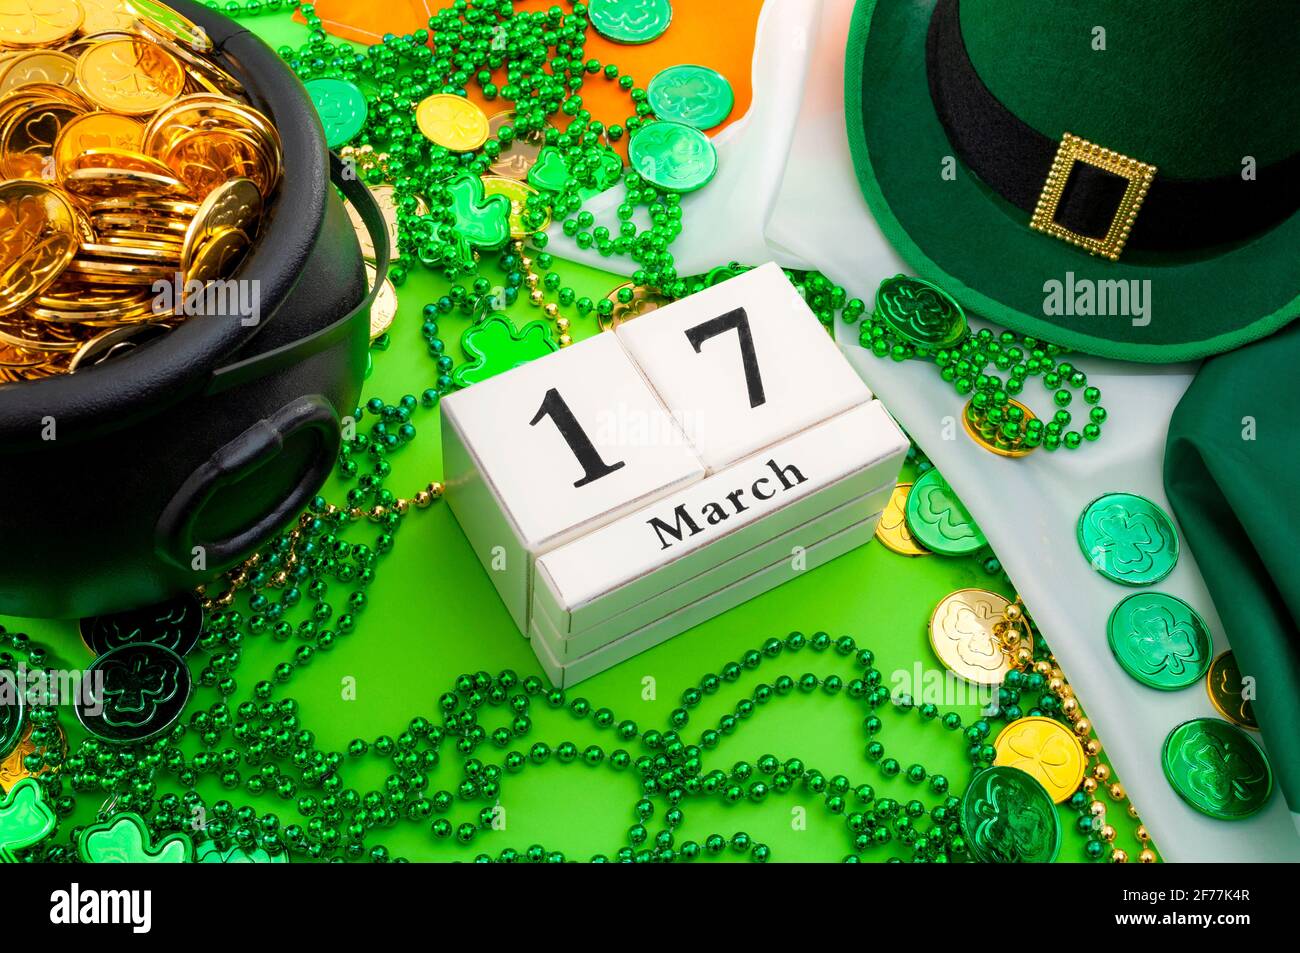 The luck of the Irish meme and Happy St Patricks day concept theme with a calendar, leprechaun hat, beads necklace and pot of gold coins on the Irelan Stock Photo